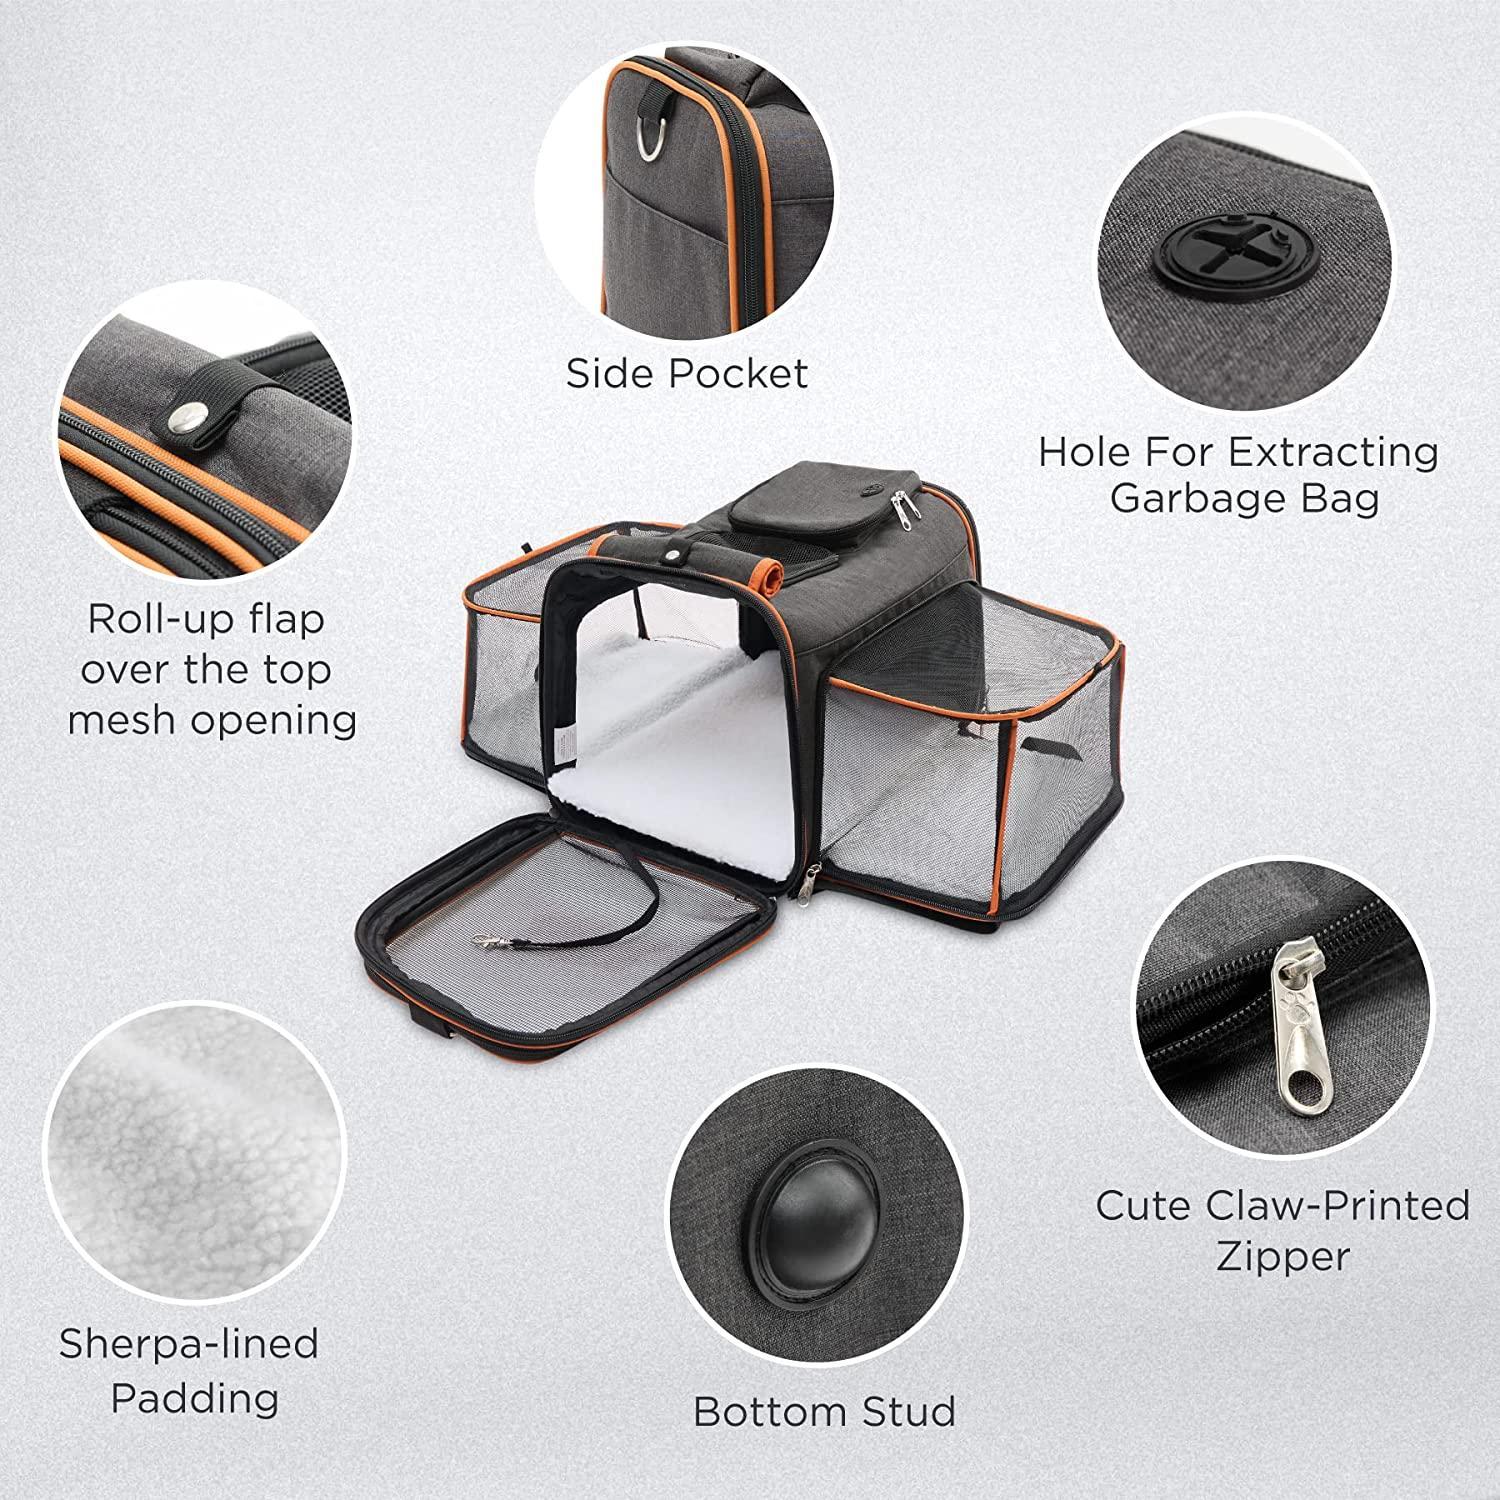 Airline Approved Expandable Foldable Portable Carrying Small Large Soft Sided Puppy Travel Cat Bags Pet Dog Carrier With Wheels